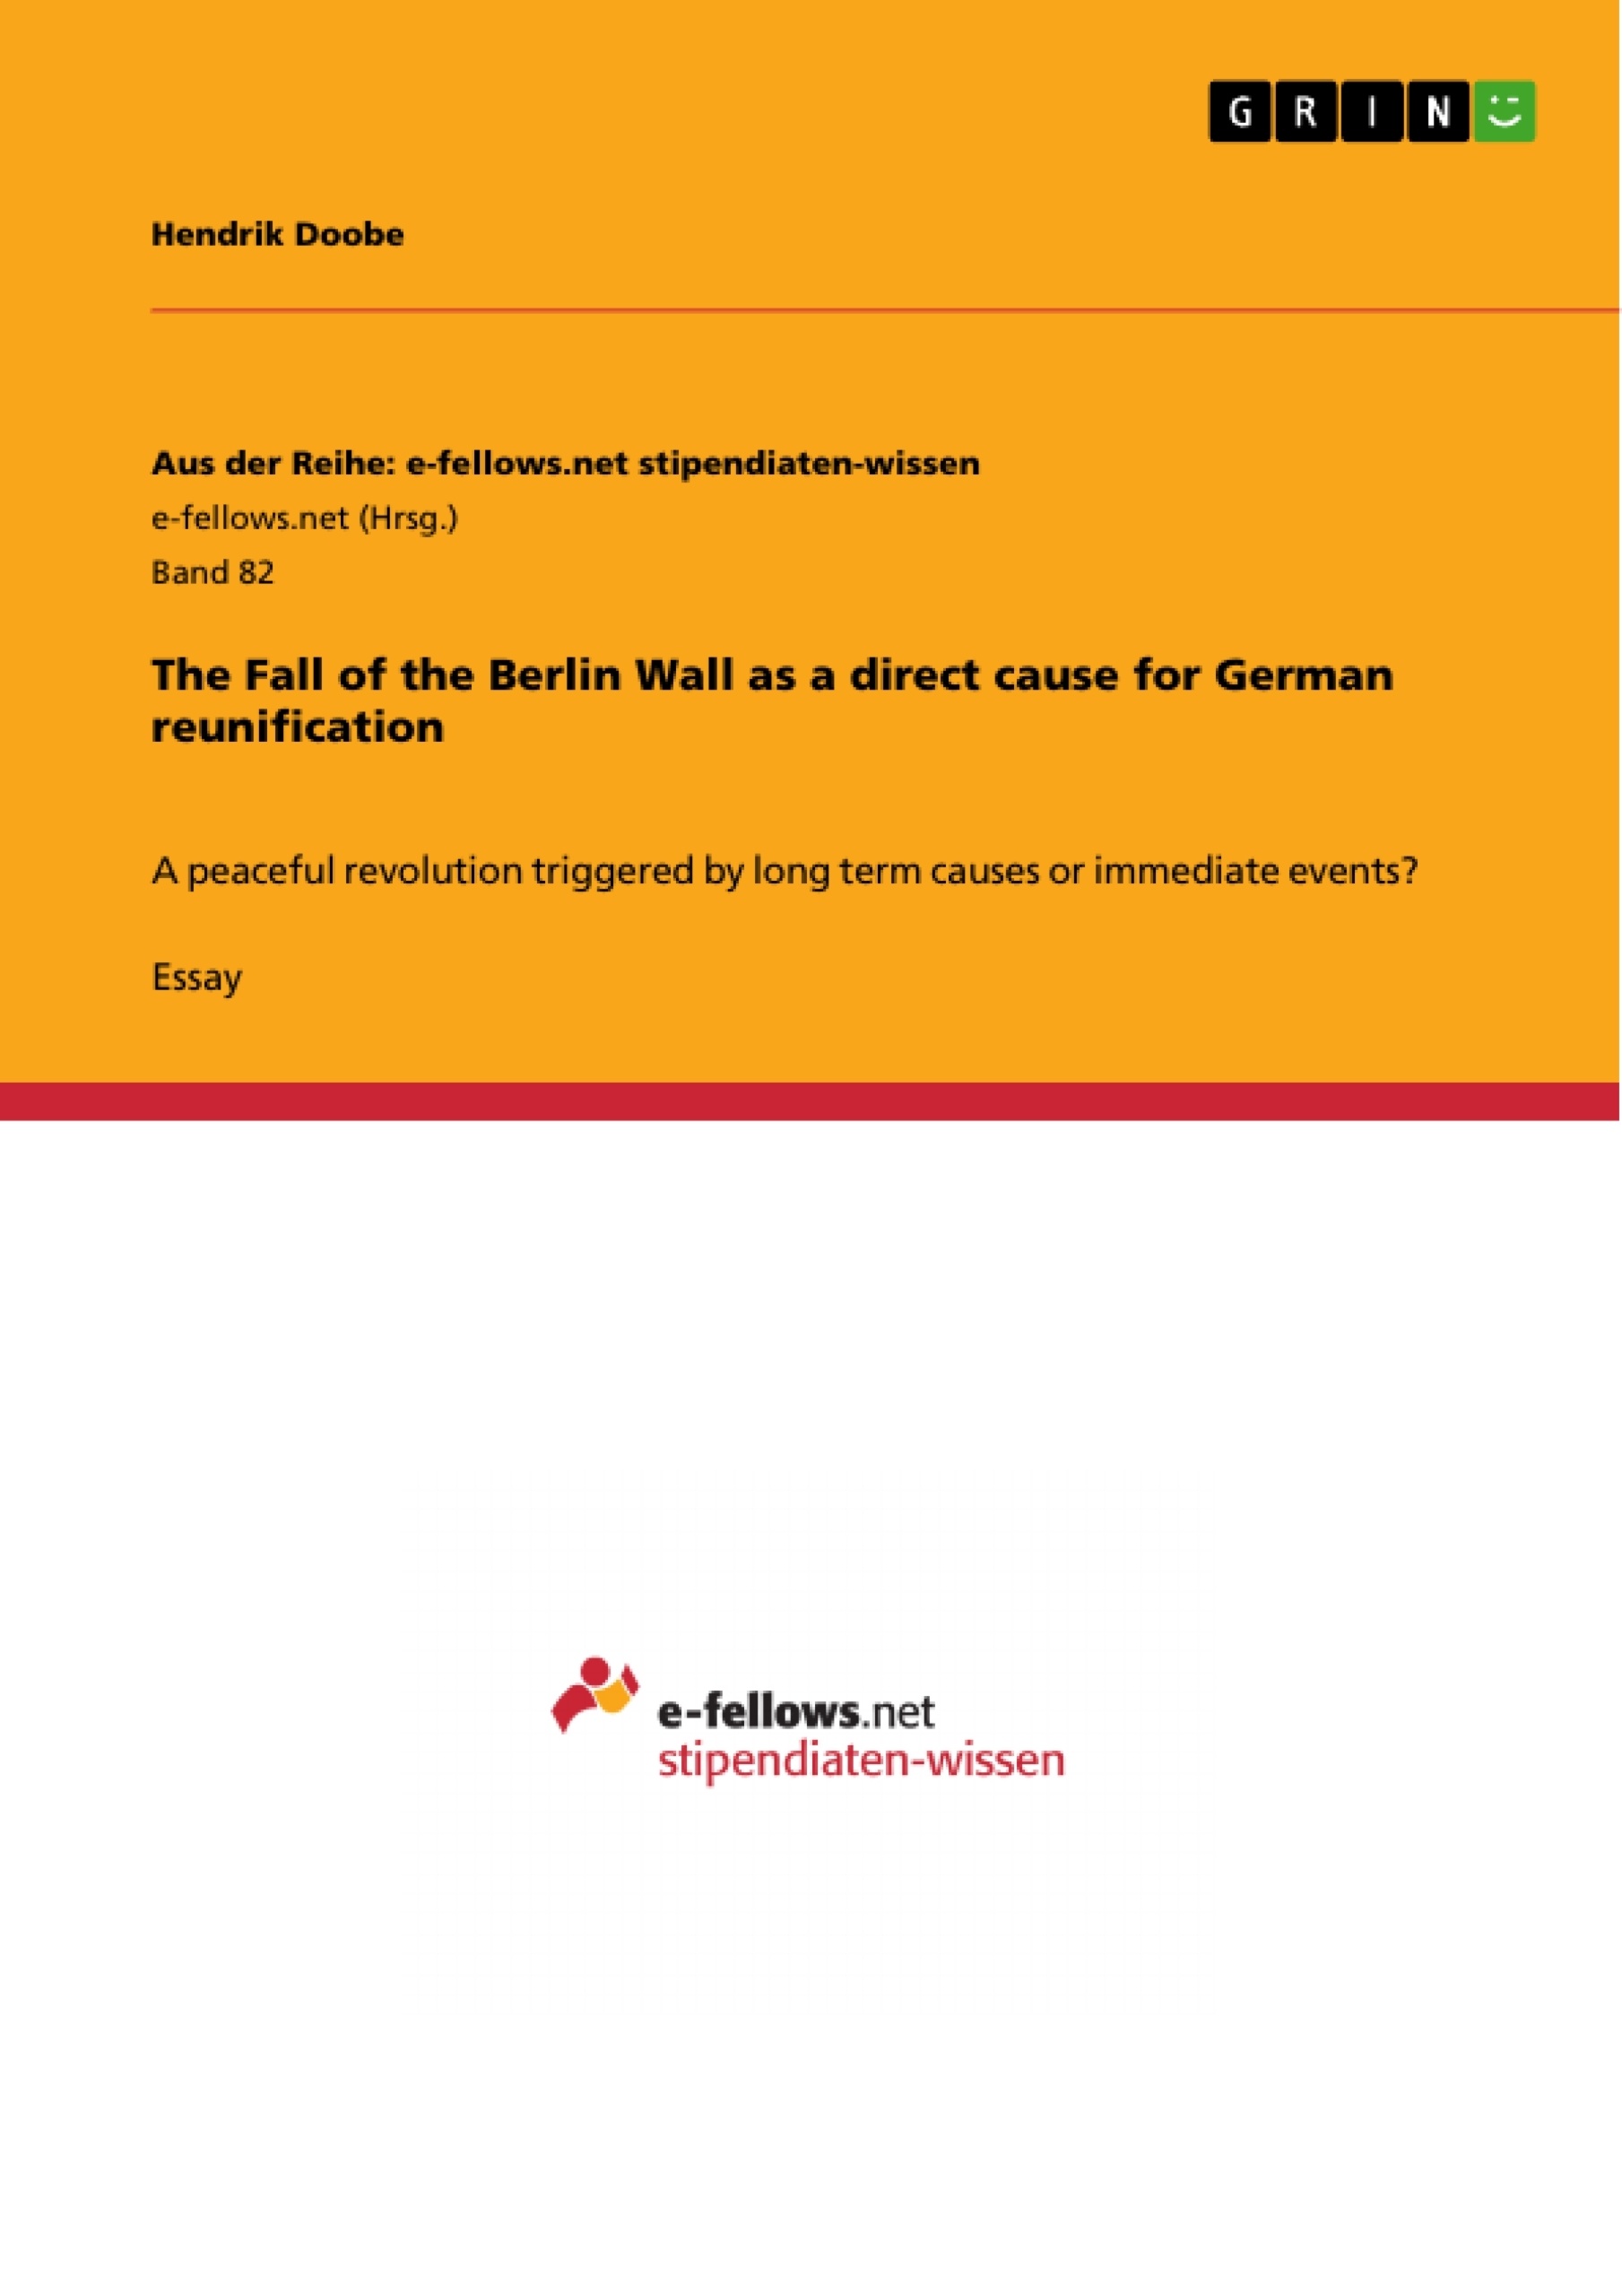 Titre: The Fall of the Berlin Wall as a direct cause for German reunification